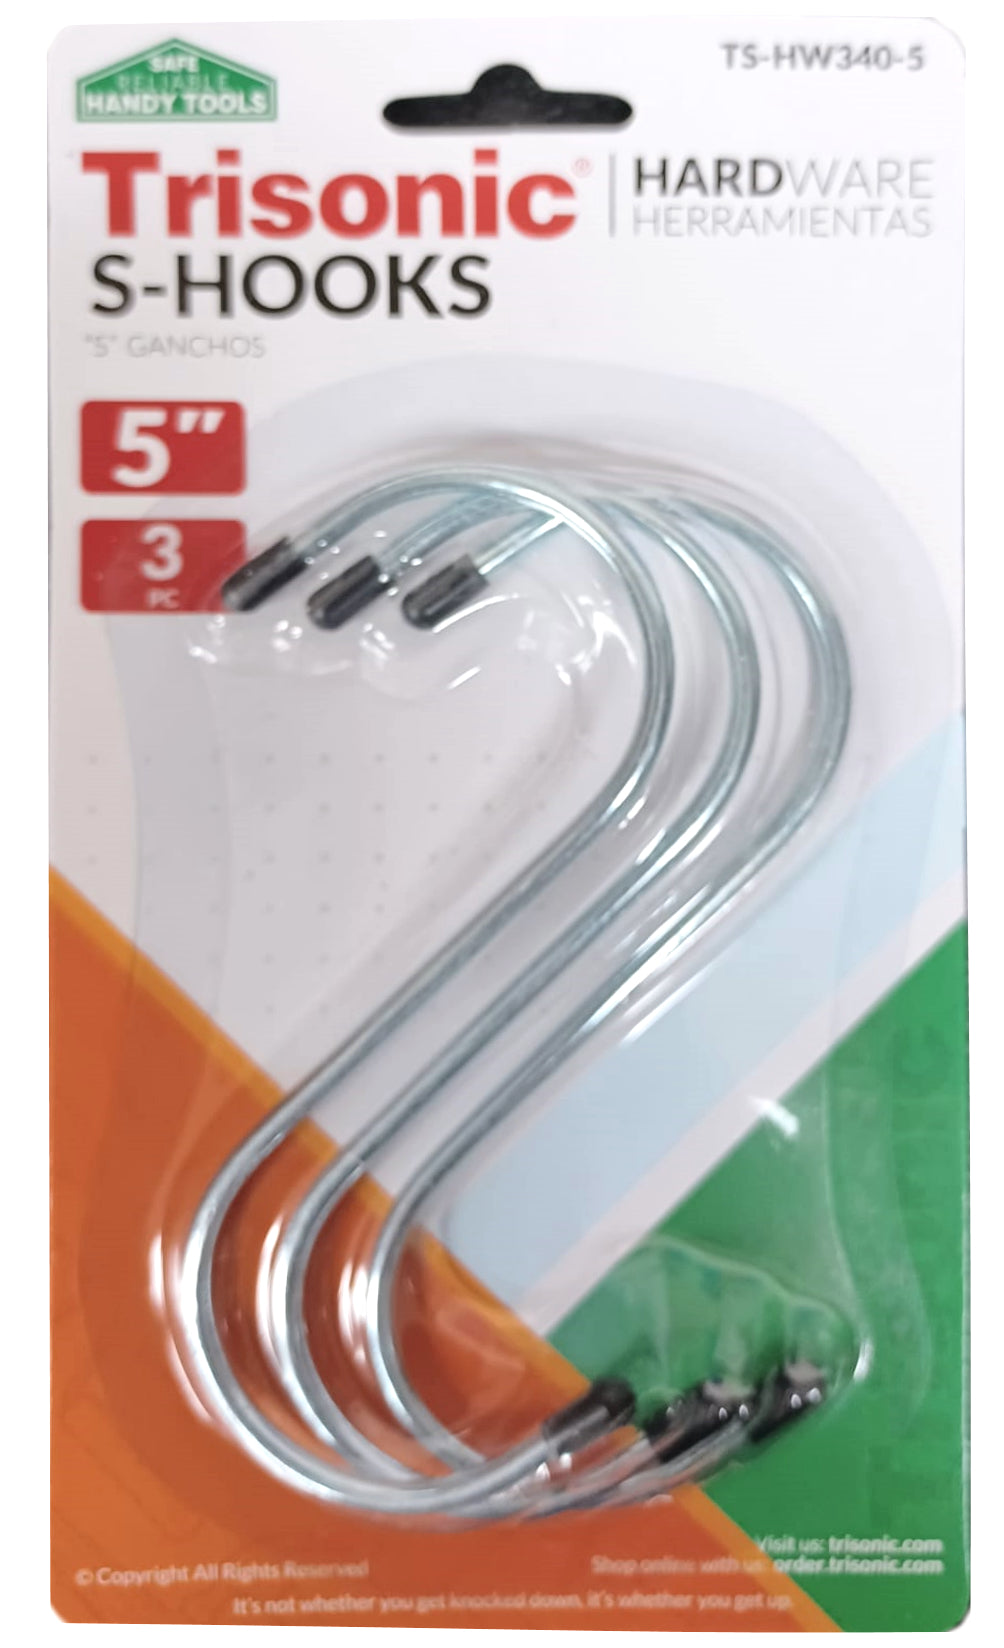 Heavy Duty Stainless Steel S Shaped 3 Hooks for Hanging Apparel Kitchenware Utensils Plants Towels Gardening Tools